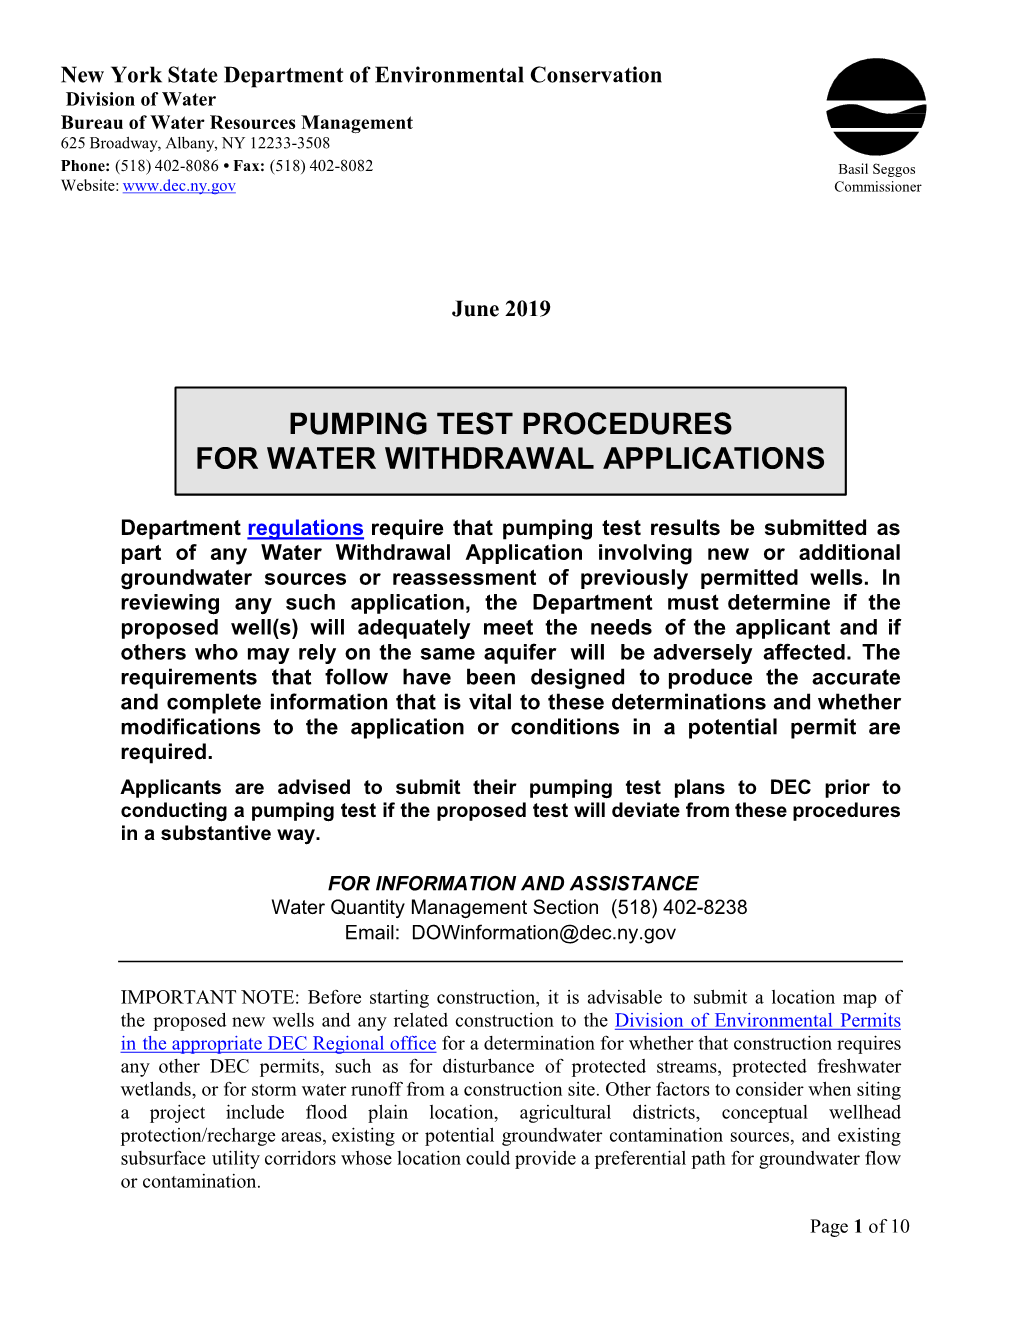 Pumping Test Procedures for Water Withdrawal Applications